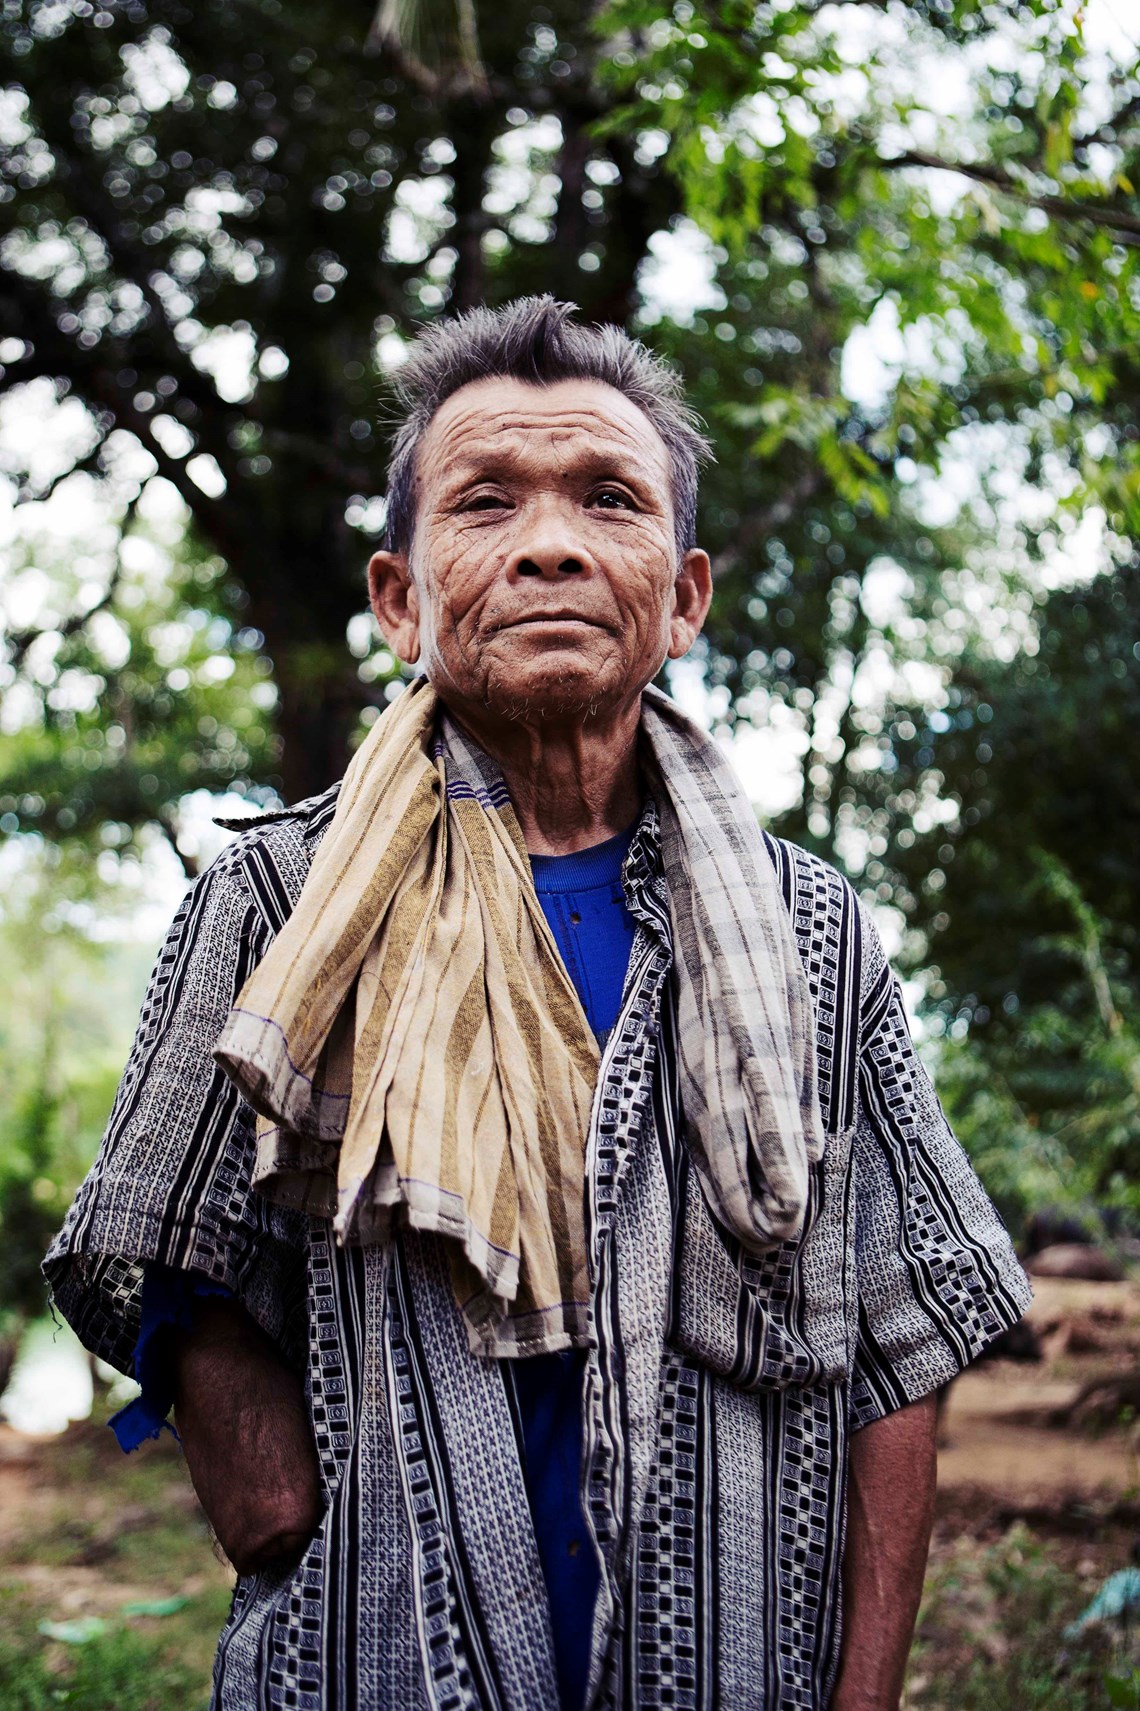 Lath Village, like so many villages in Laos, was repeatedly bombed during the Vietnam War with many unexploded cluster munitions remaining to this day, causing injury and death and preventing safe farming.